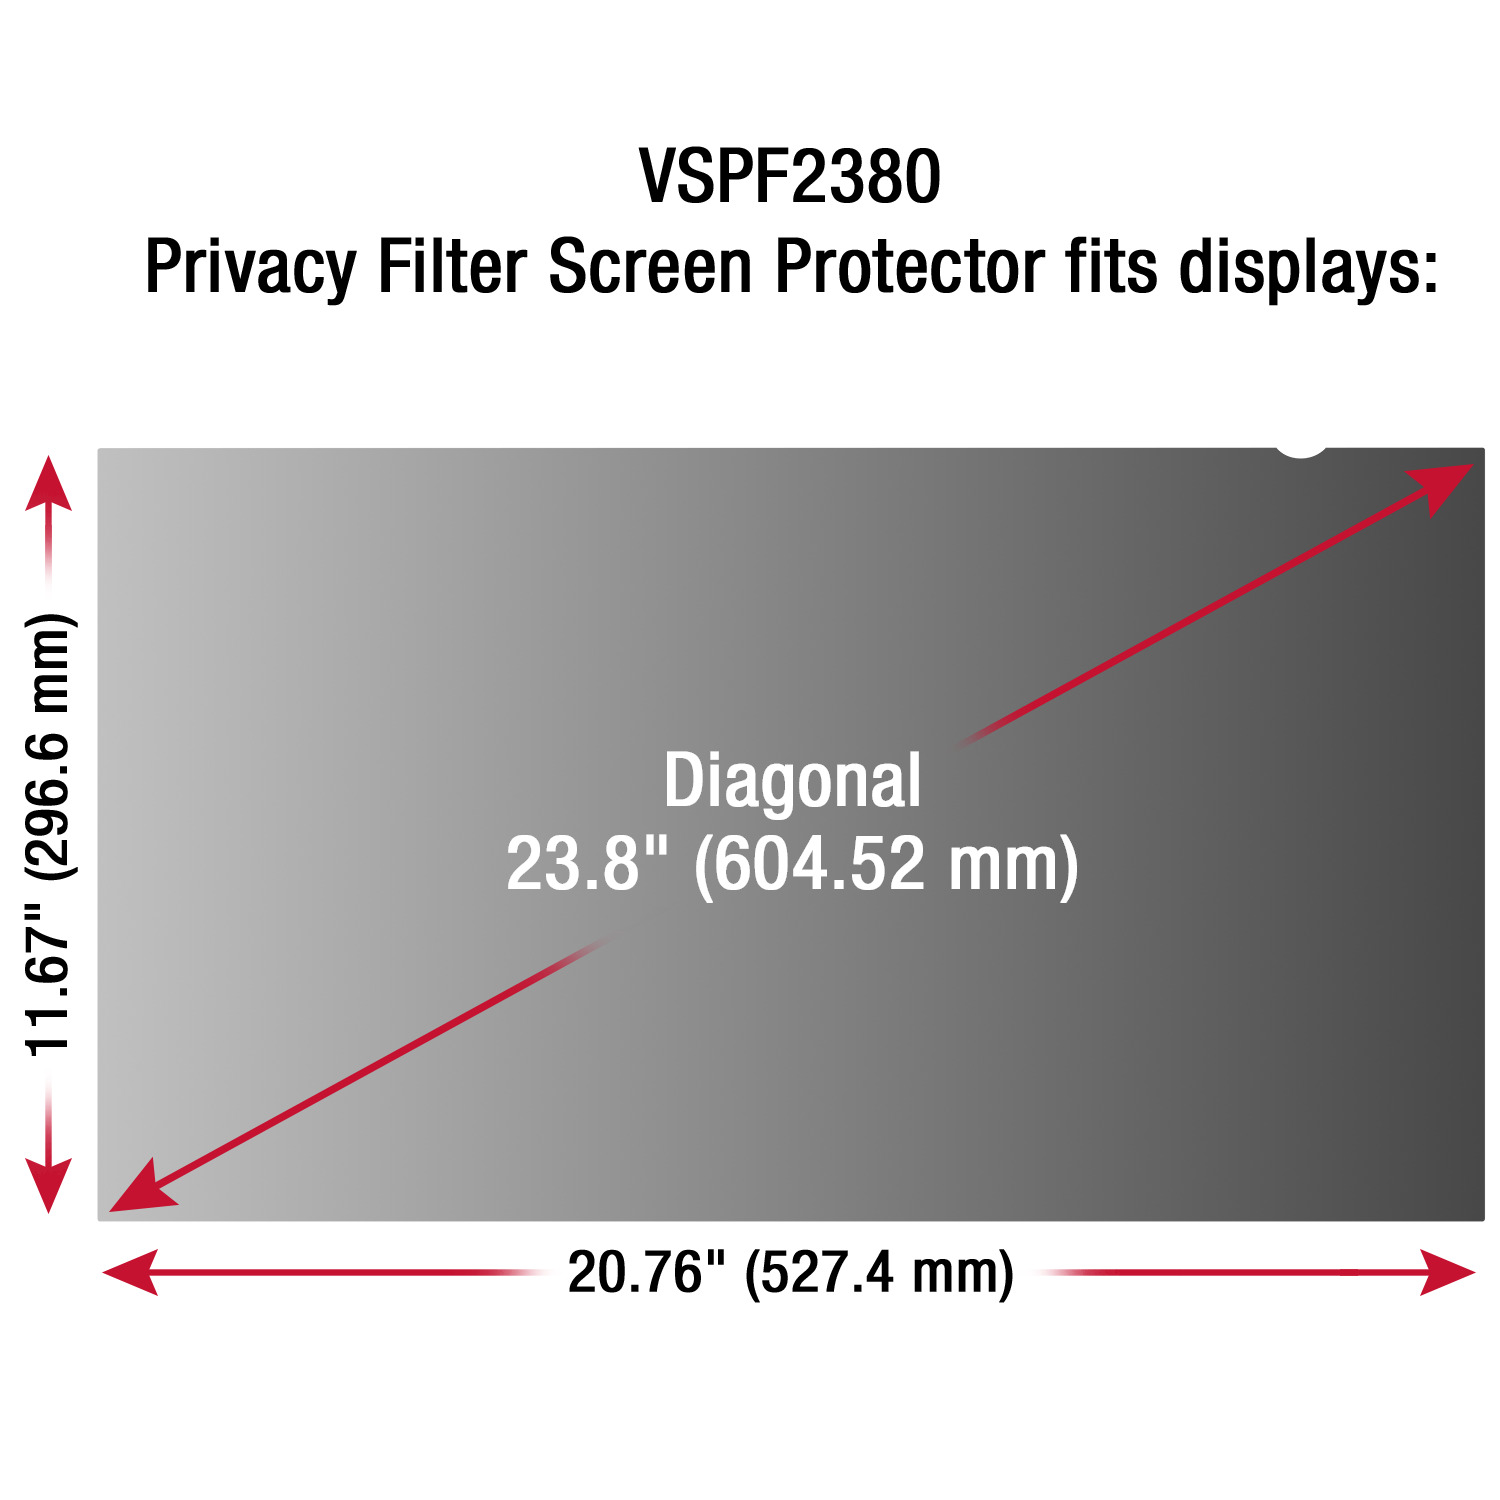 ViewSonic VSPF2380 Privacy Filter Screen Protector